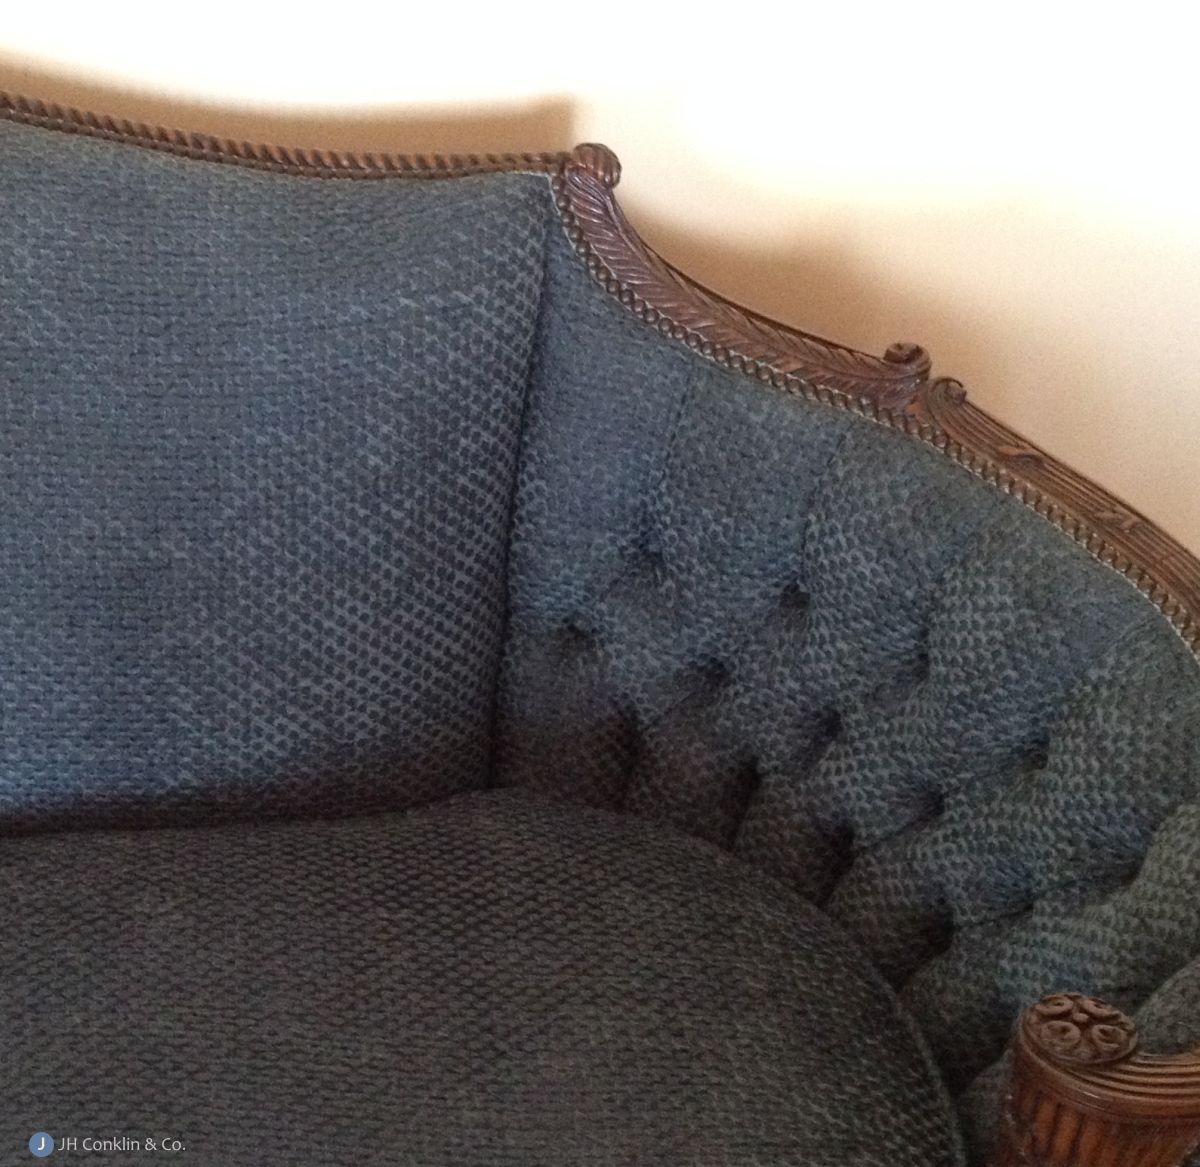 Upholstery: Buttons, Channels, Tufts and Fabric